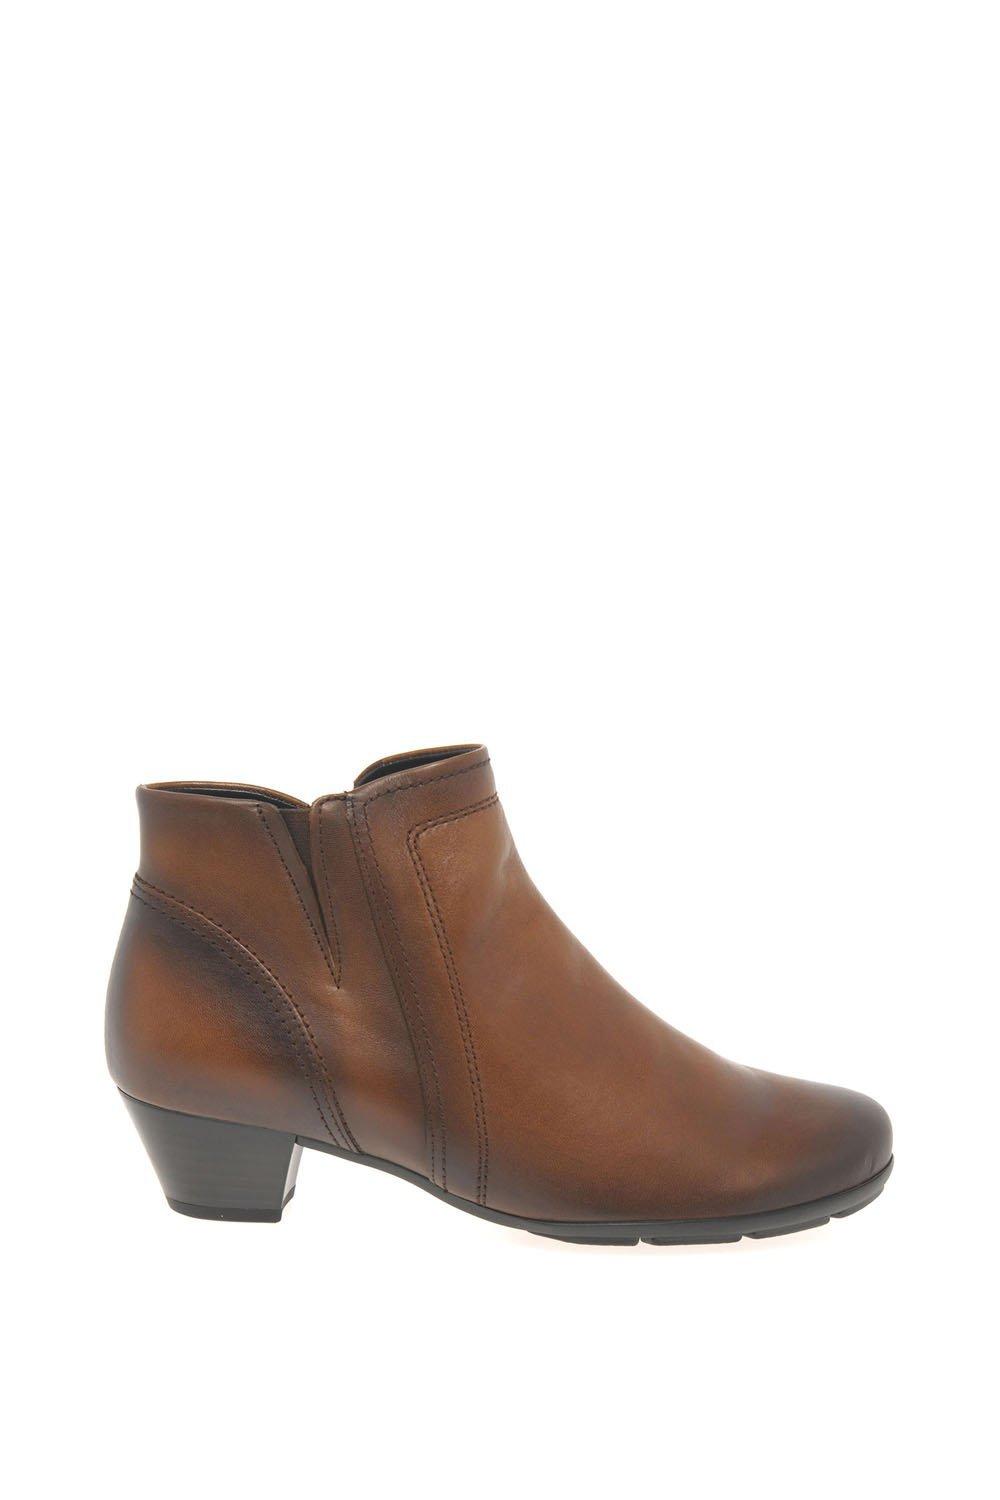 'Heritage' Ankle Boots